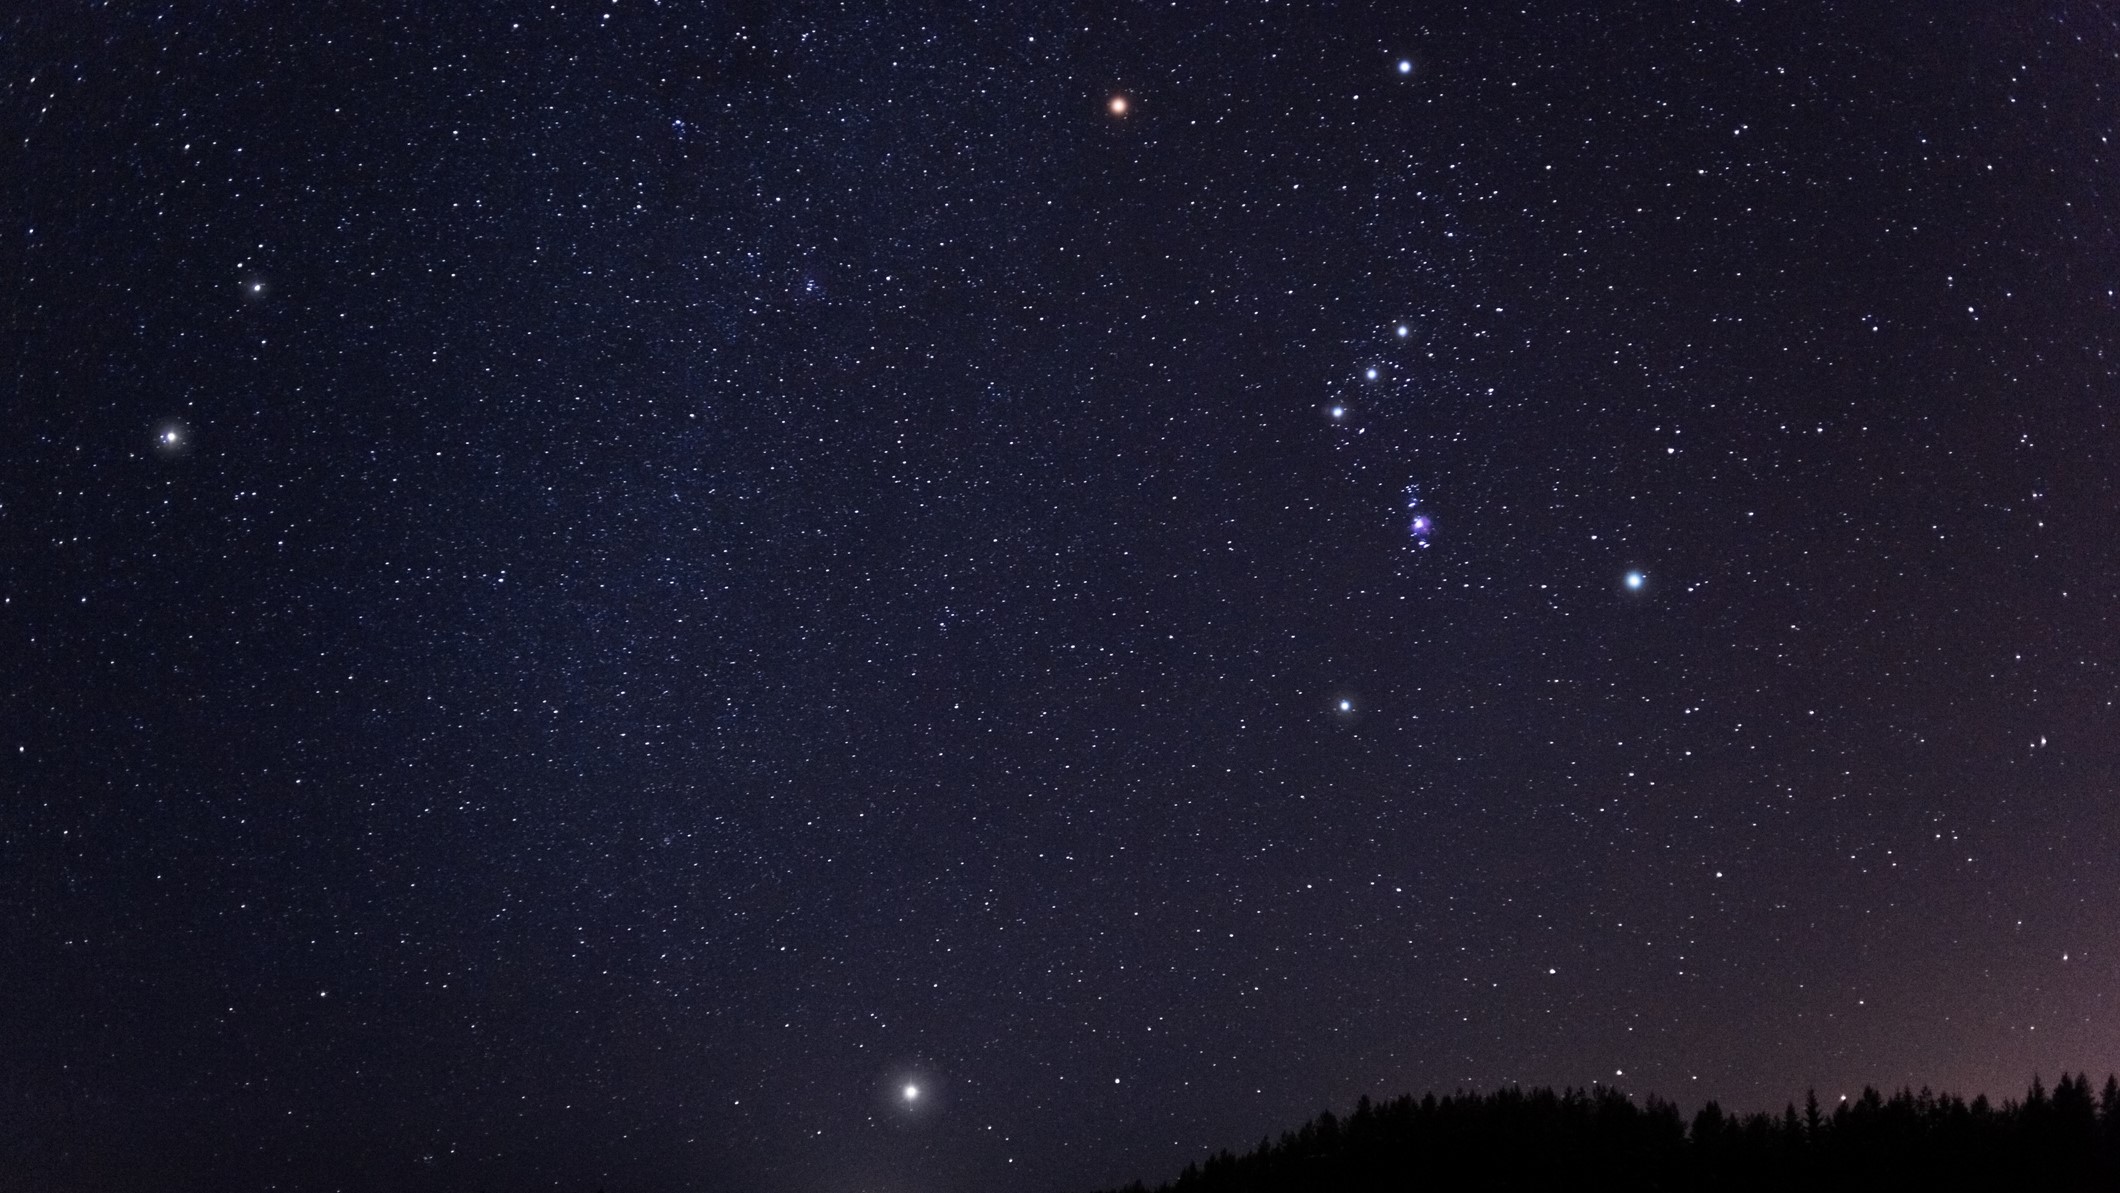 Bright stars in night sky make up the Orion constellation.